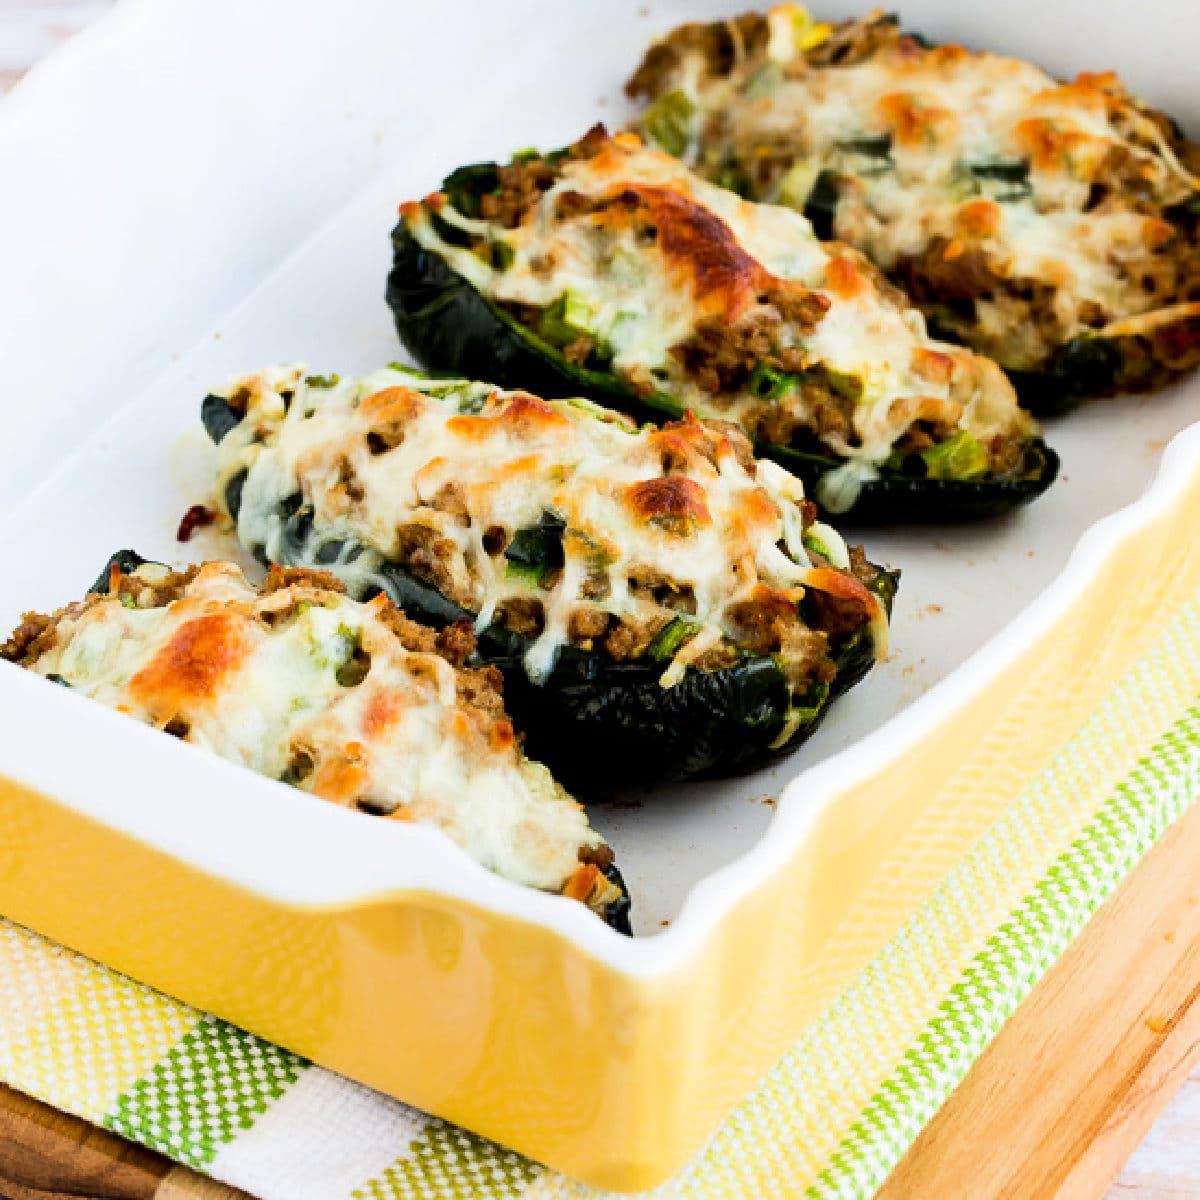 Square image for Stuffed Poblanos with Ground Turkey shown in baking dish.